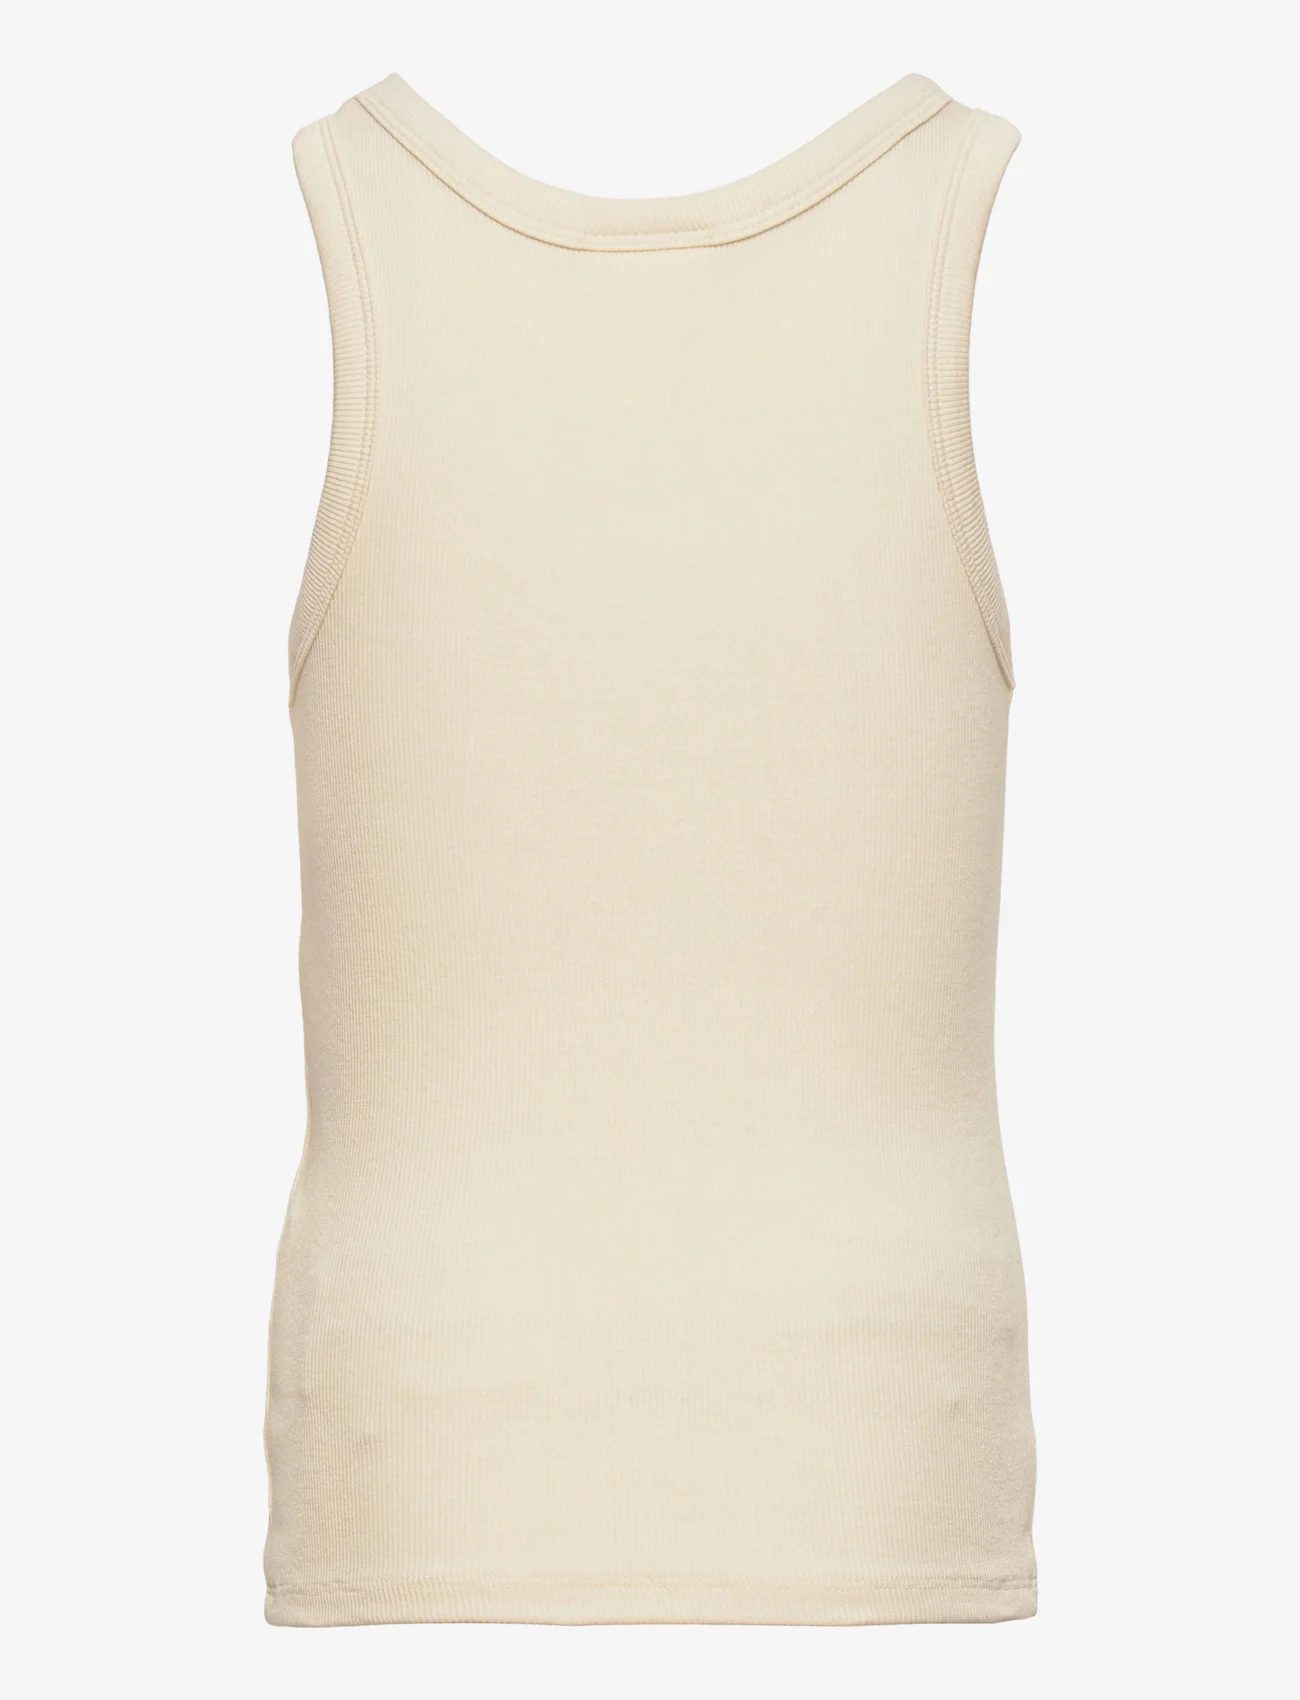 Sofie Schnoor Baby and Kids - Top - sleeveless tops - antique white - 1